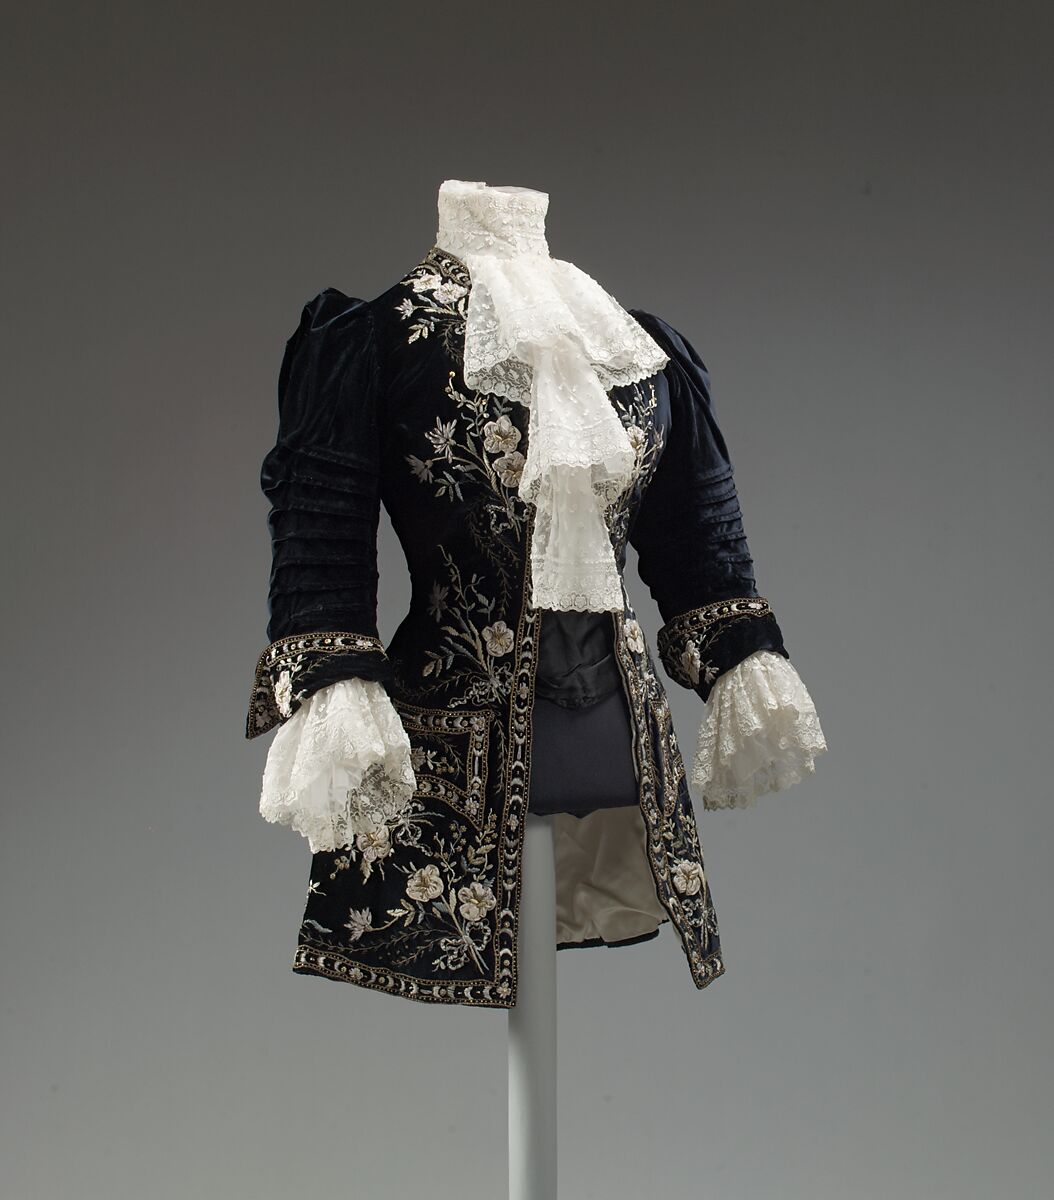 Riding ensemble, Morin Blossier (French), silk, metal thread, ostrich feathers, French 